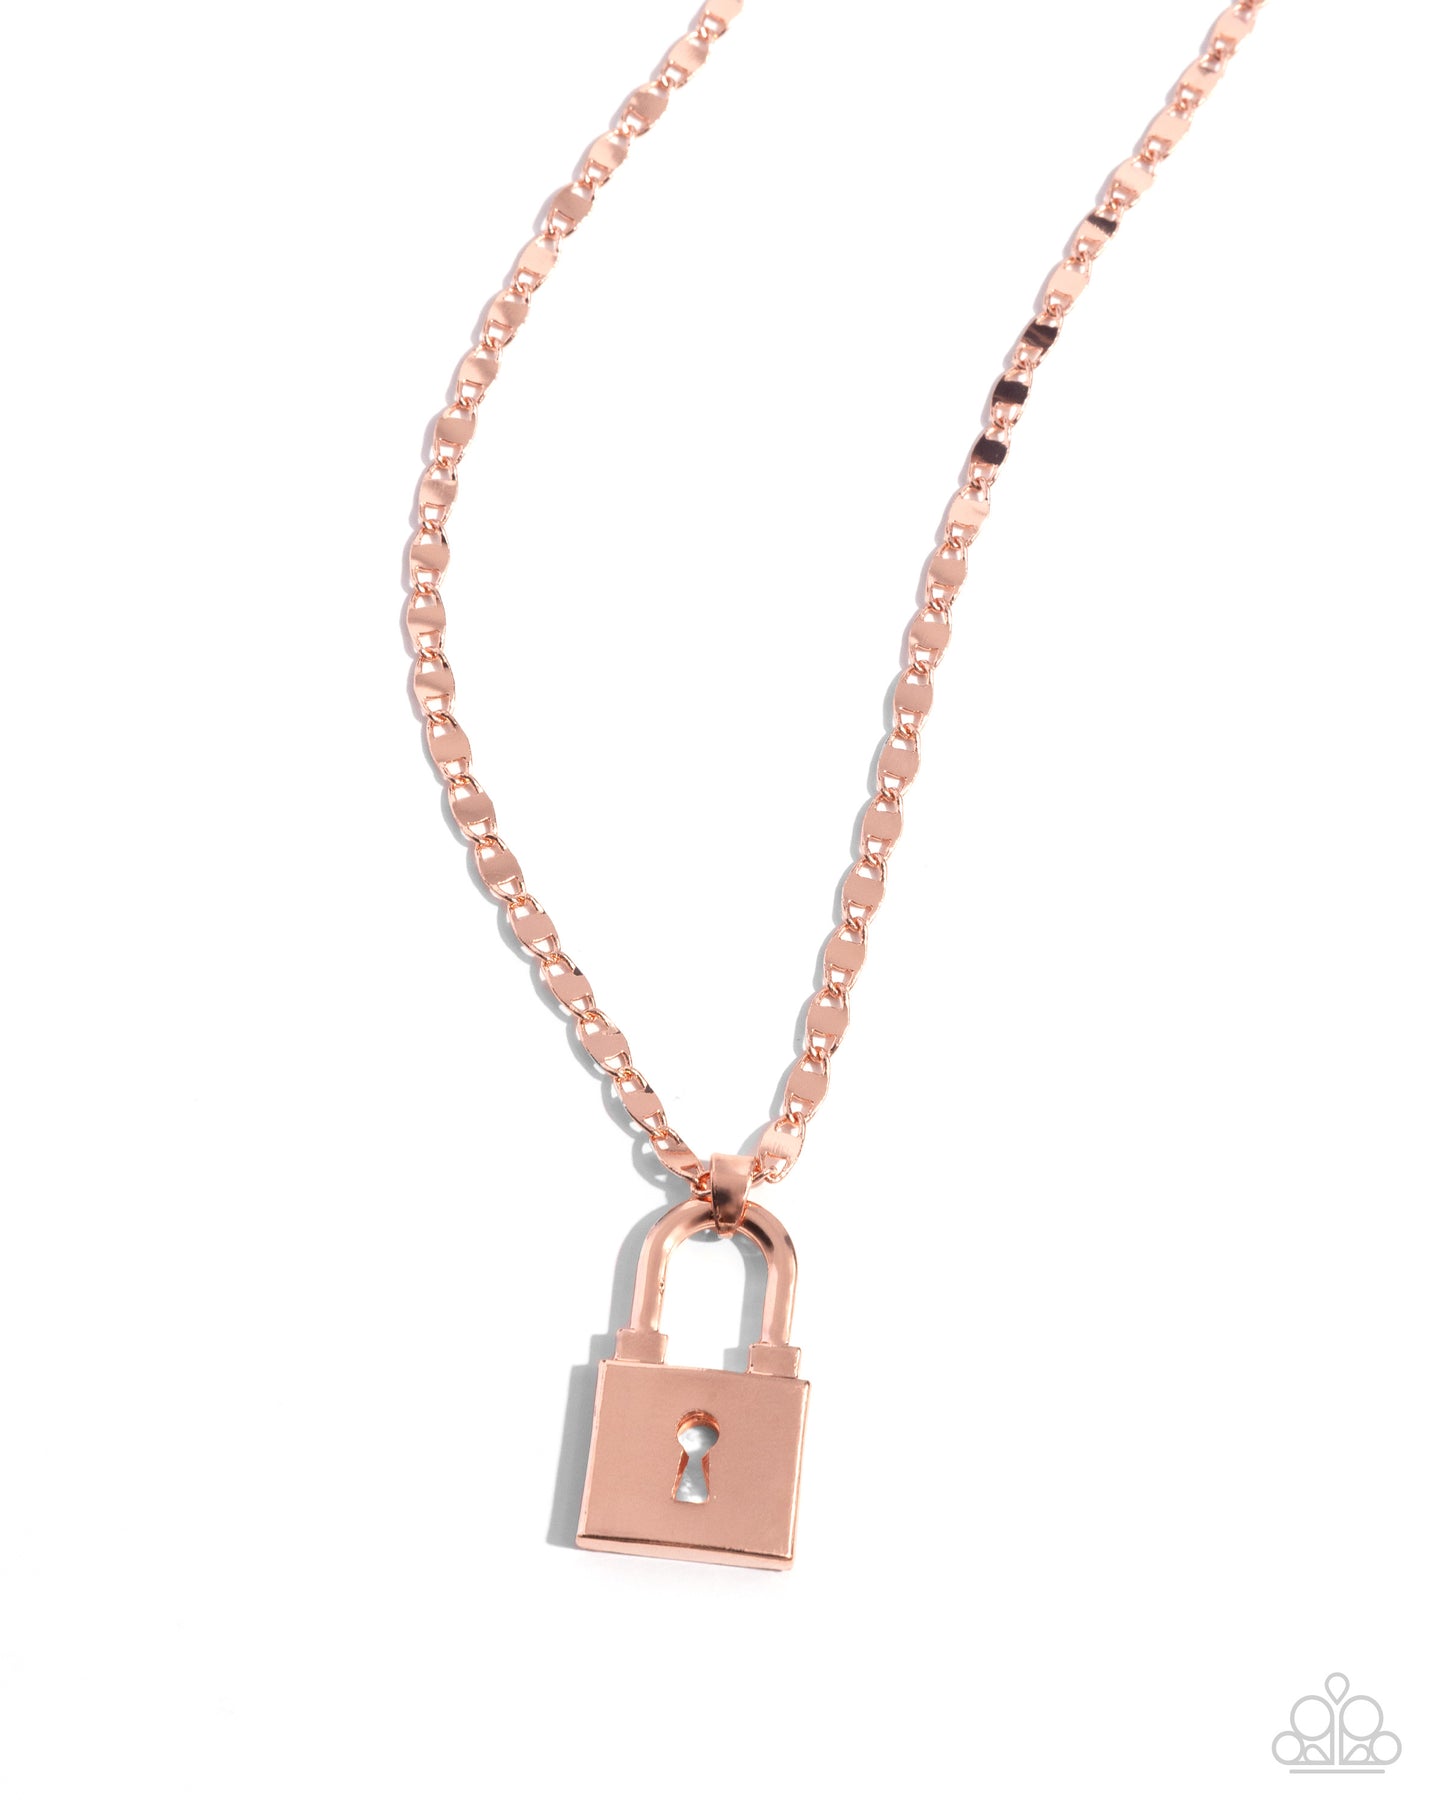 <p data-mce-fragment="1">Gliding along a shiny copper abstract chain, a shiny copper padlock pendant reflects light off its surface below the neckline for a simple statement. Features an adjustable clasp closure.</p> <p data-mce-fragment="1"><i data-mce-fragment="1">Sold as one individual necklace. Includes one pair of matching earrings.</i></p>